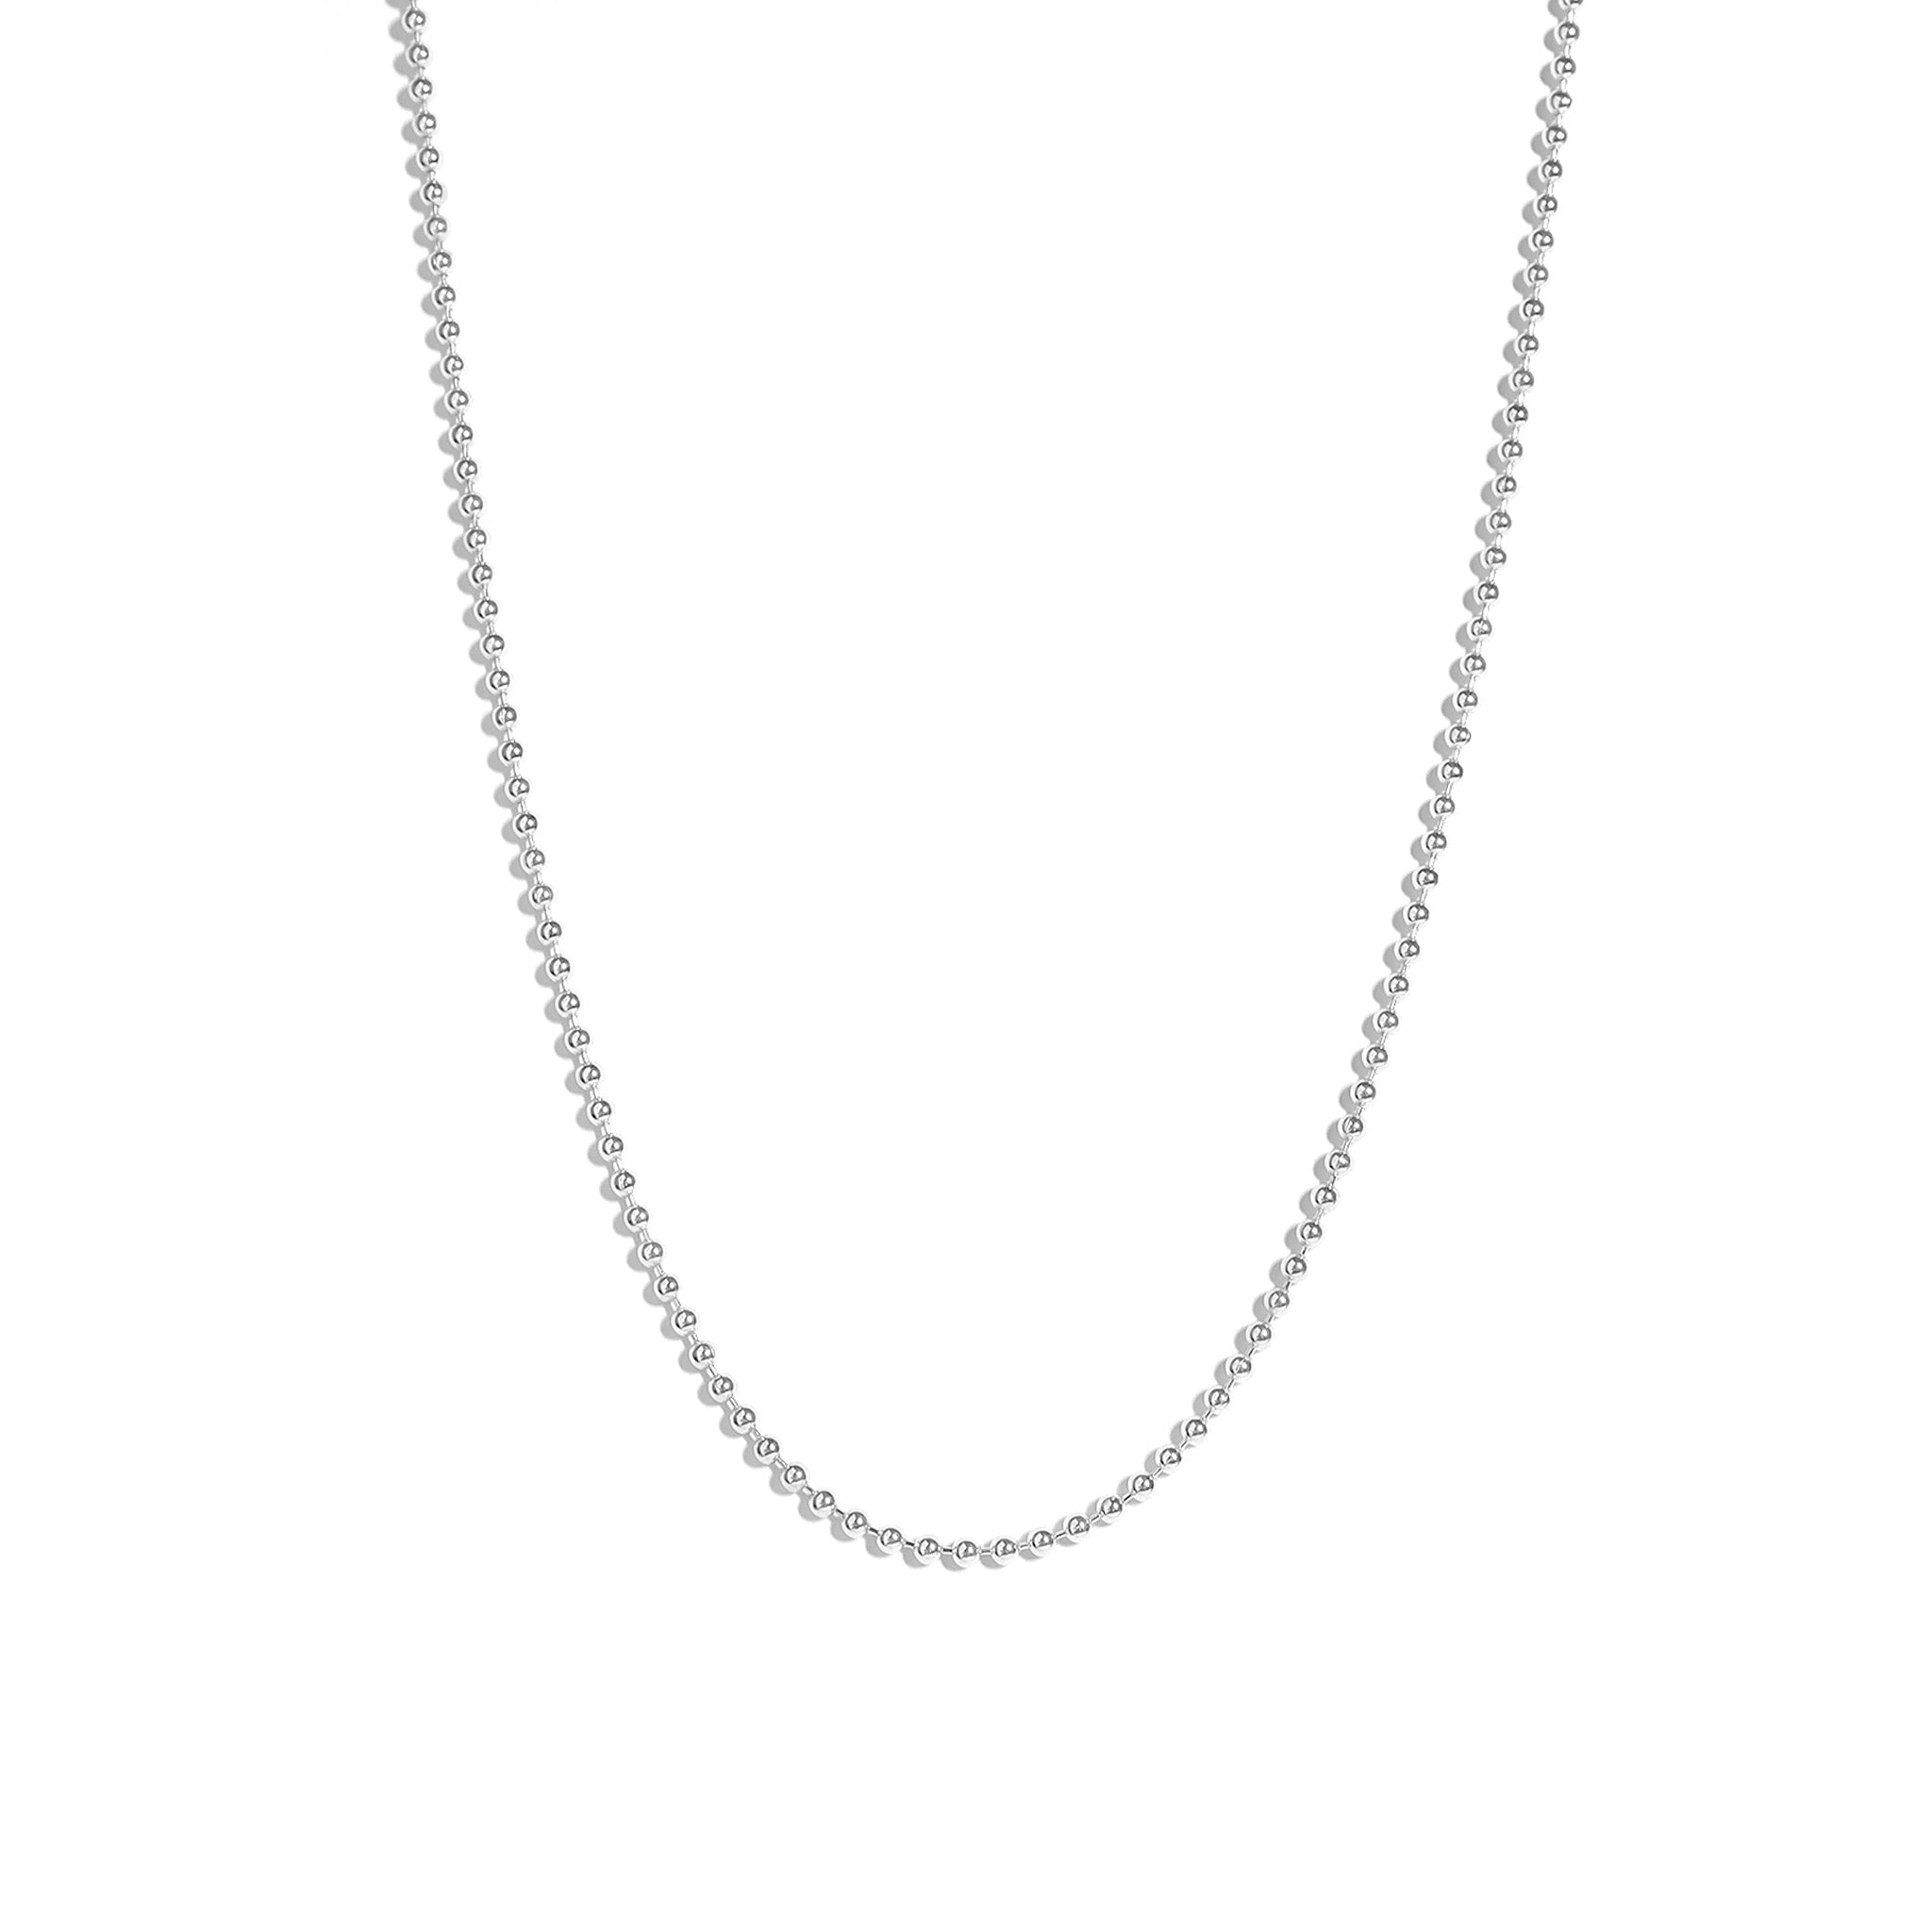 Sterling Silver Ball Chain Necklace / DIS0127